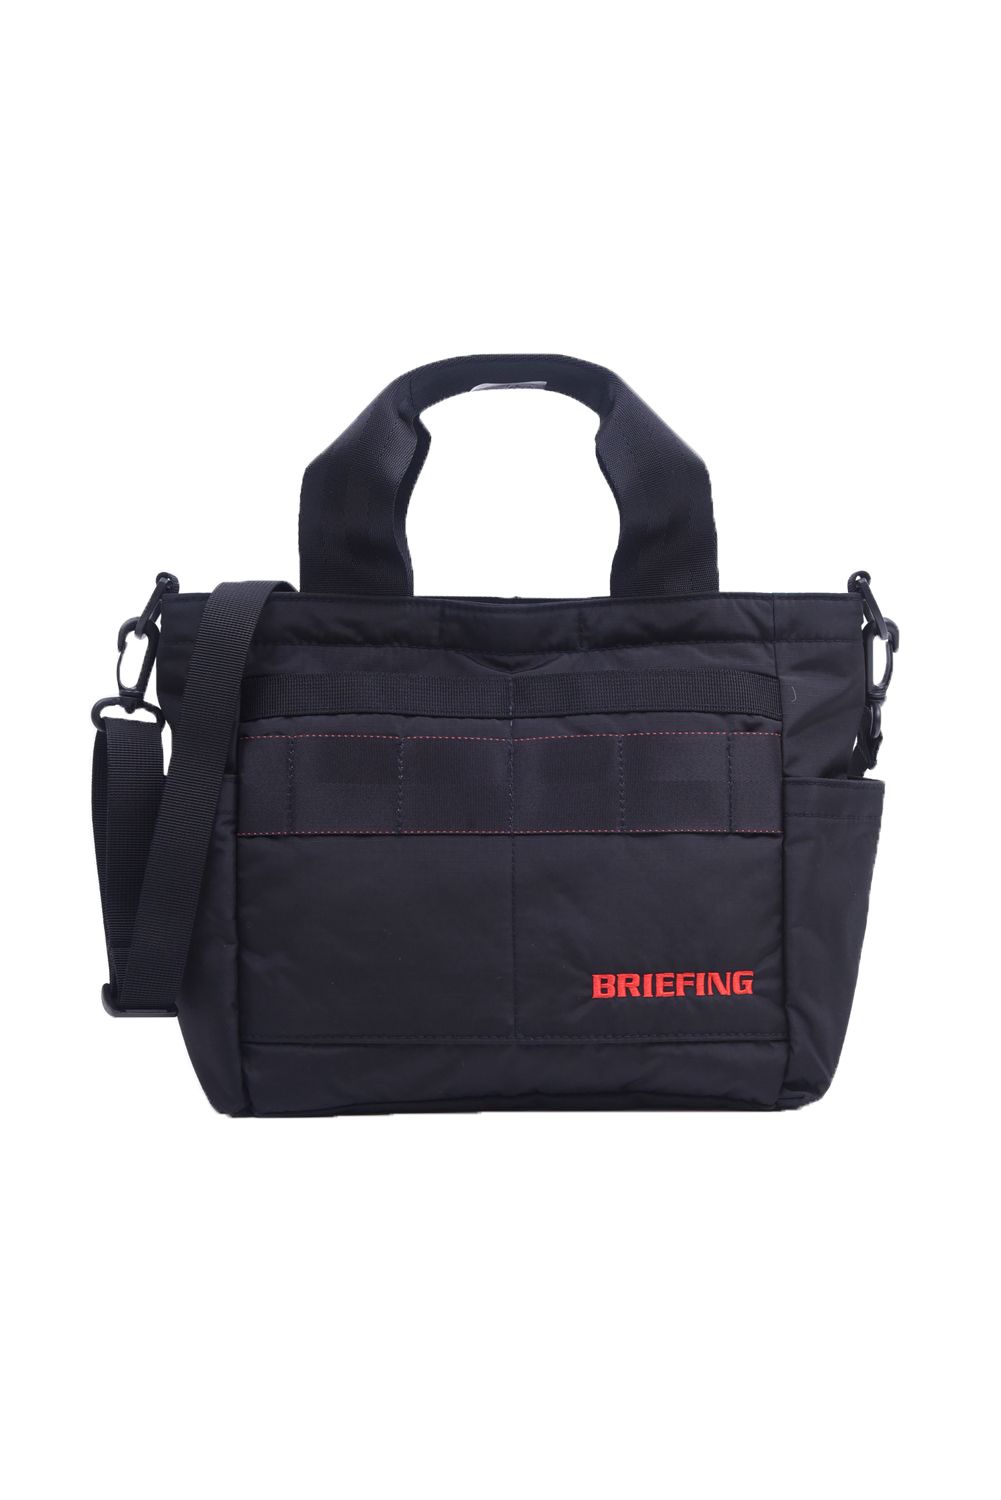 BRIEFING - 【1680Dエアバリスティックナイロン】 CART TOTE AIR 